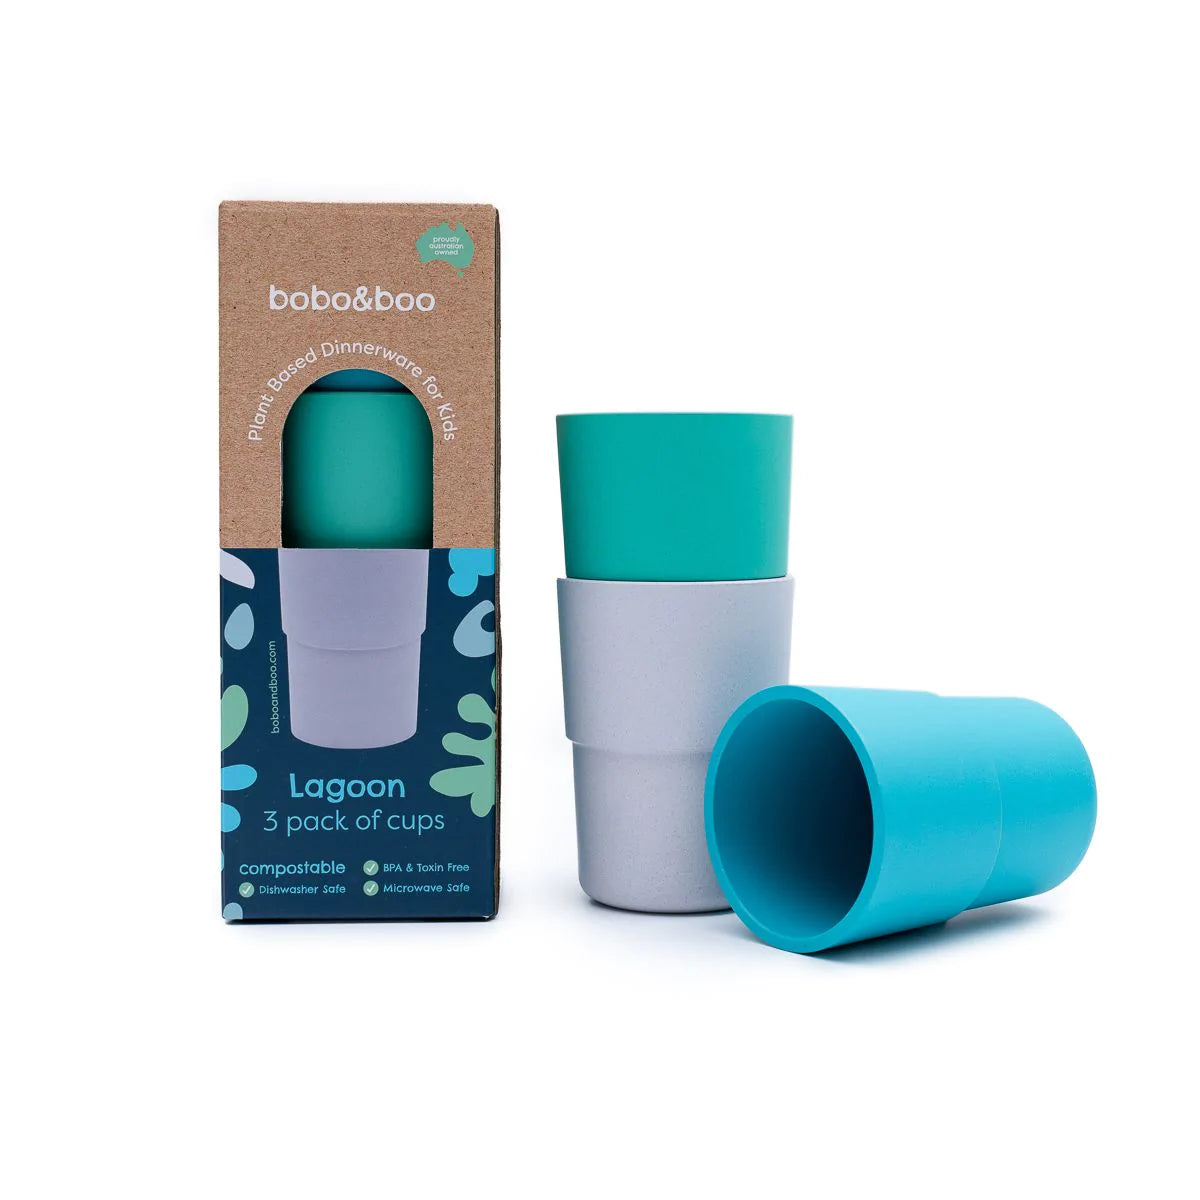 Plant-Based 3 Pack of Cups - Lagoon (300ml)